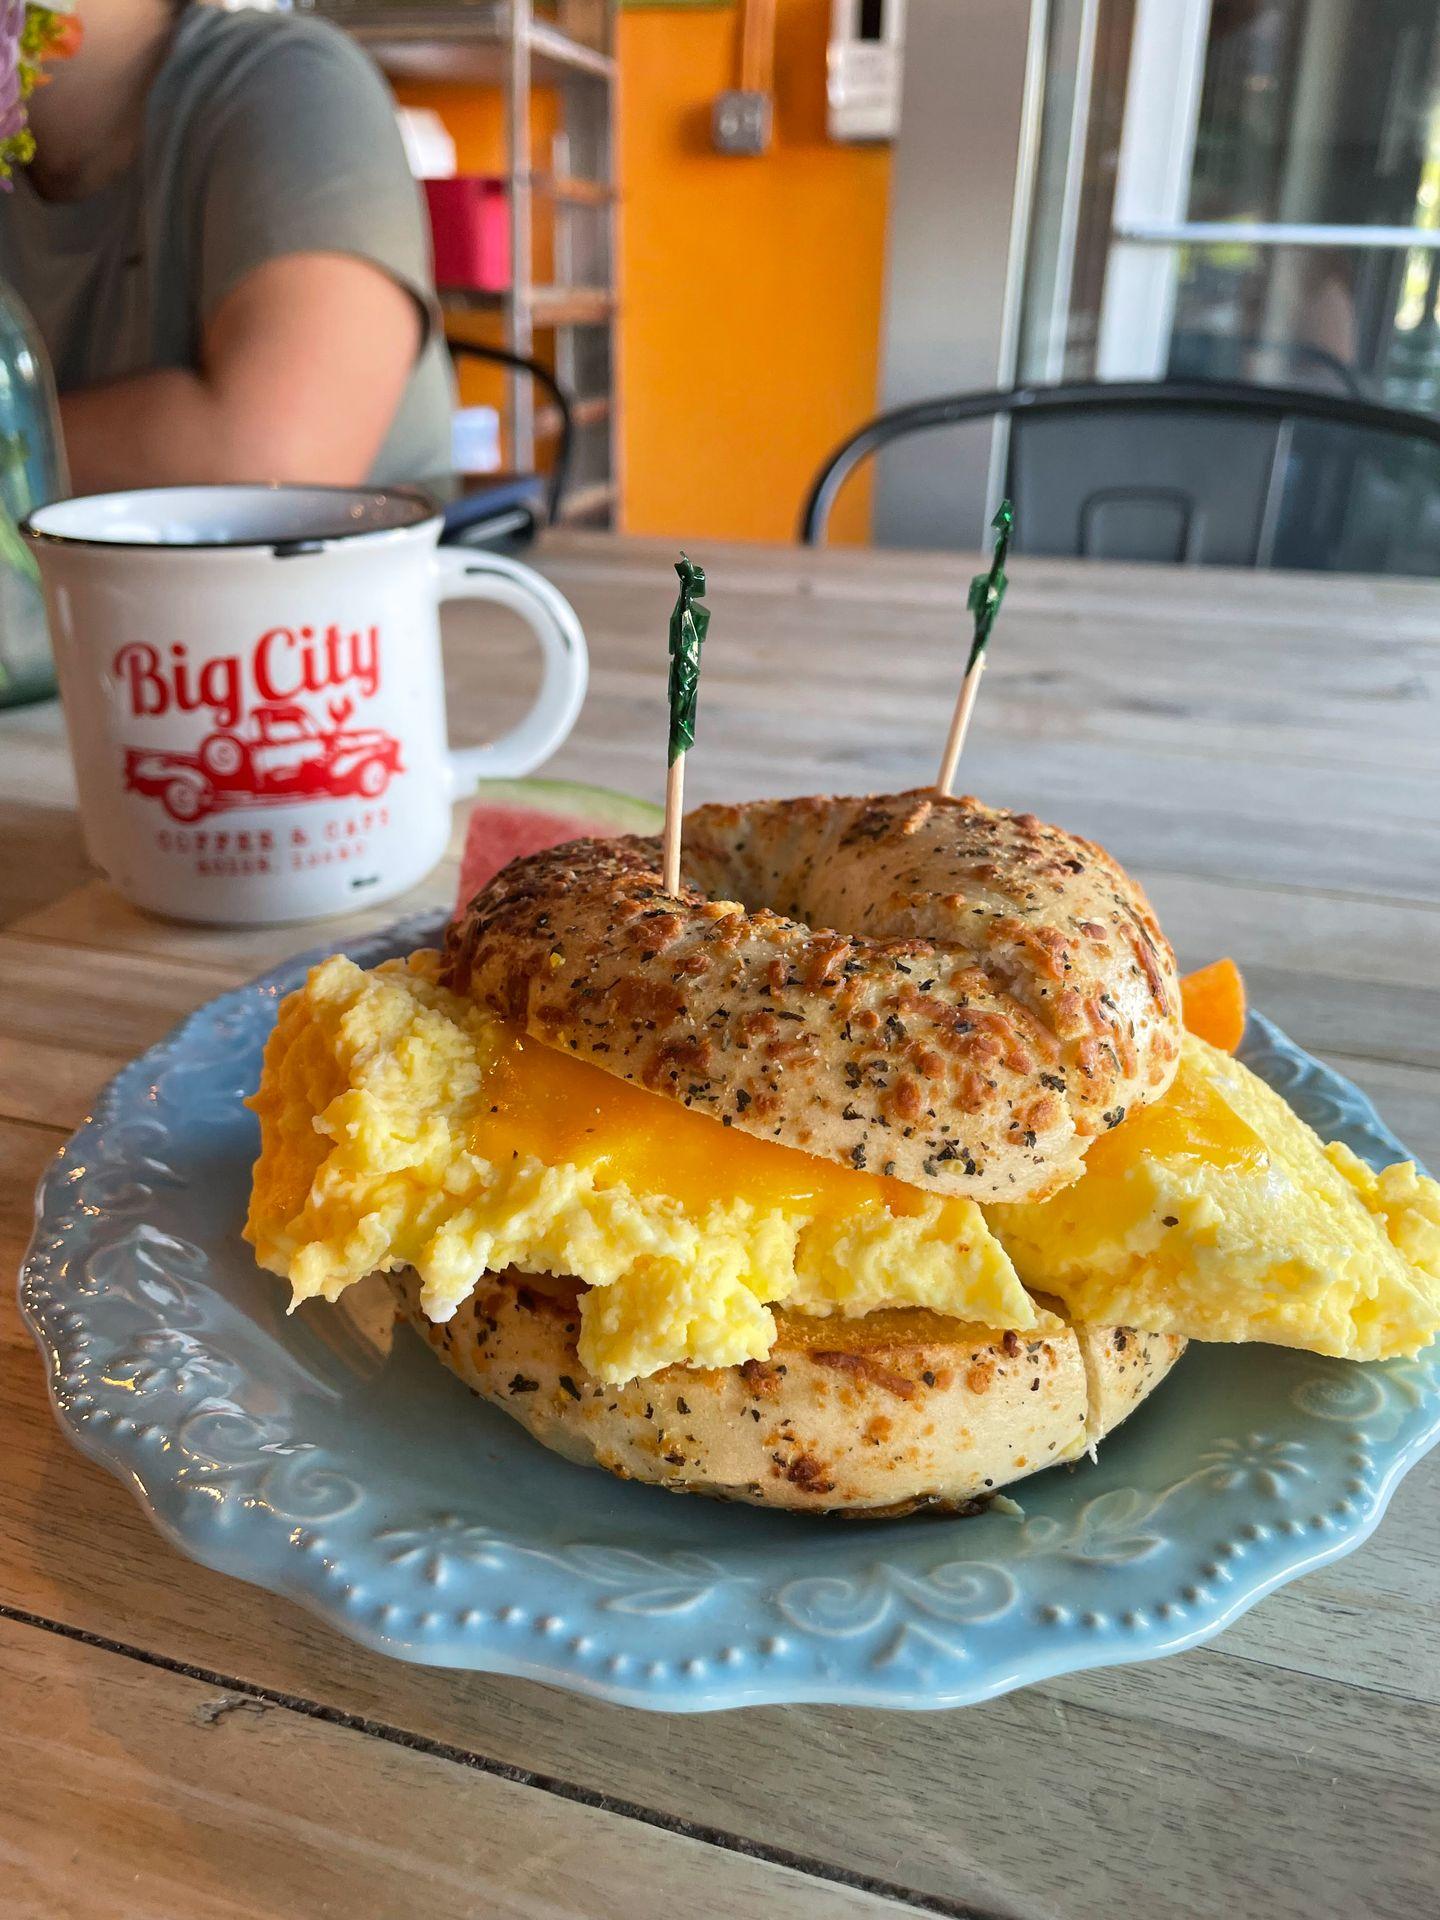 A bagel sandwich with fluffy steamed eggs and cheese from Big City Coffee.